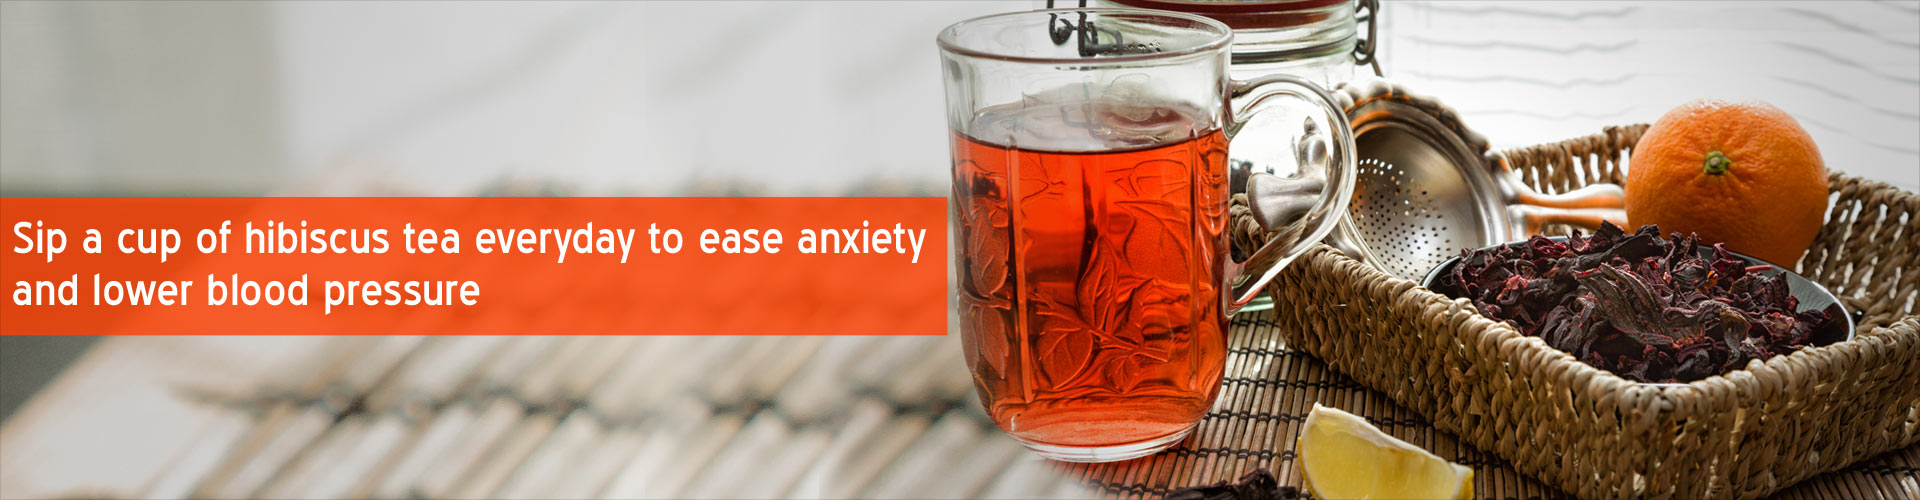 Sip a cup of hibiscus tea everyday to ease anxiety and lower blood pressure